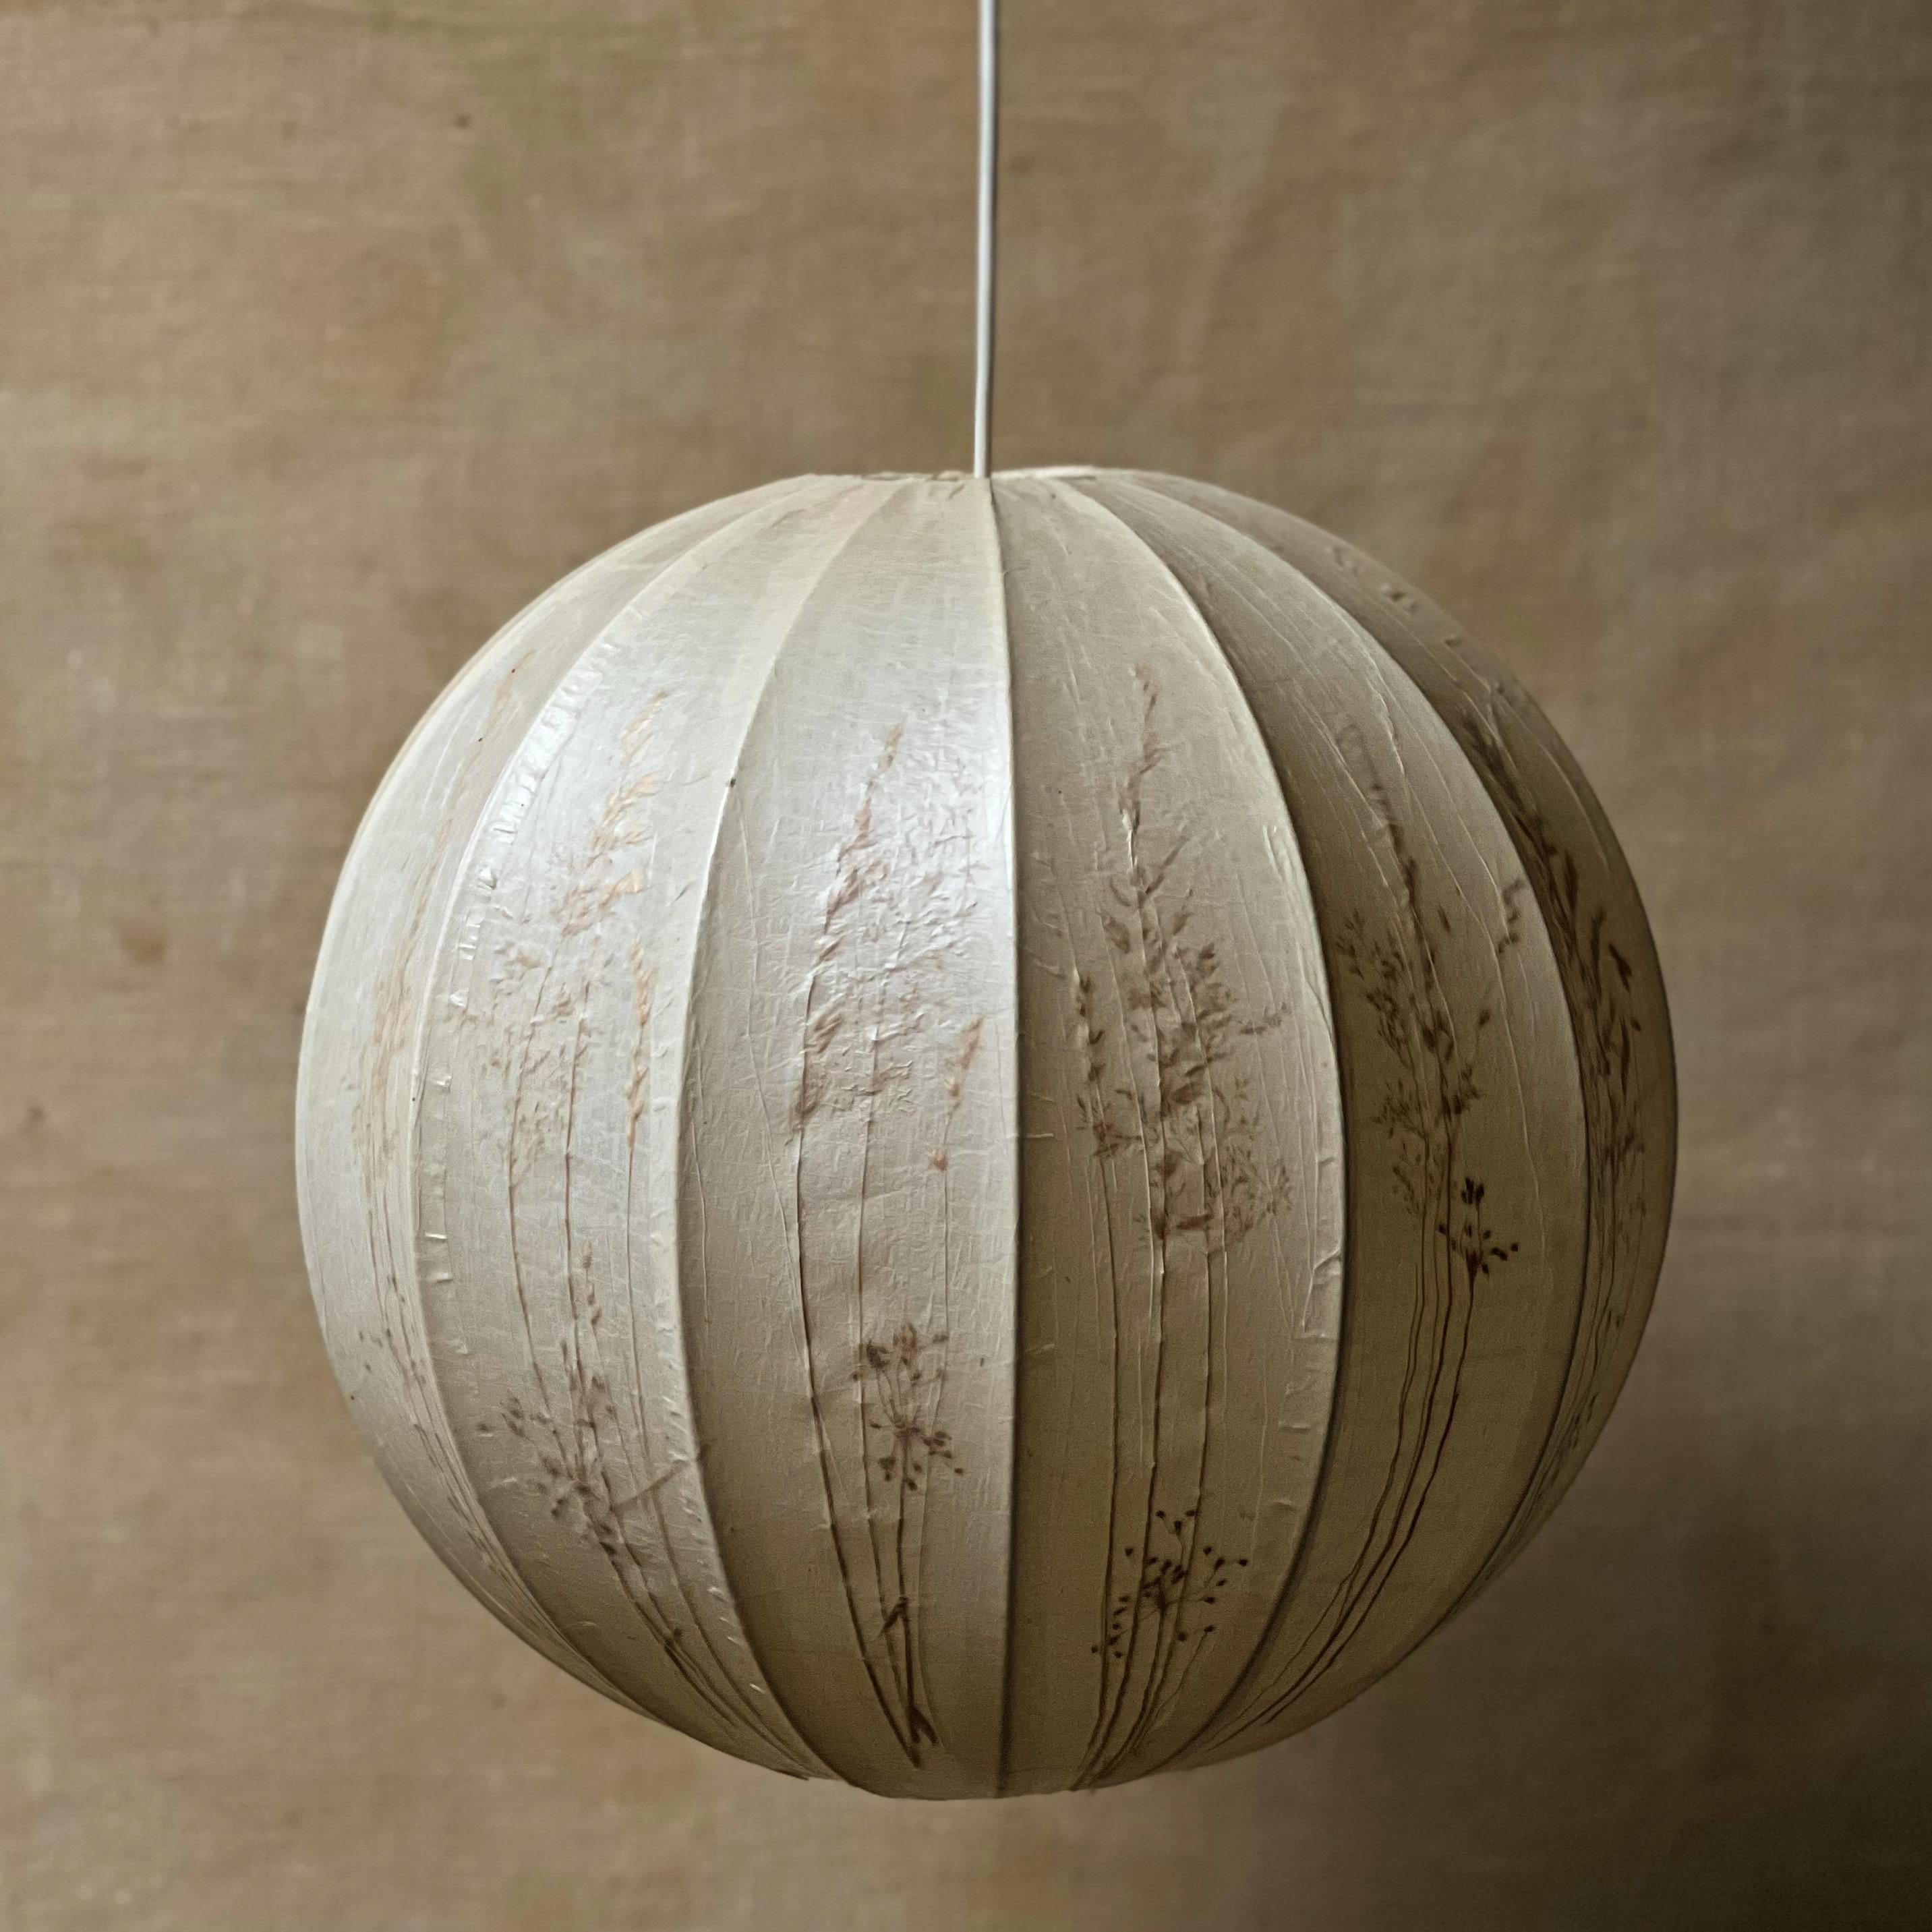 This suspension is made of natural materials what is paper with plants in between. Made by hand in Sweden and designed by master Carl Malmsten the 